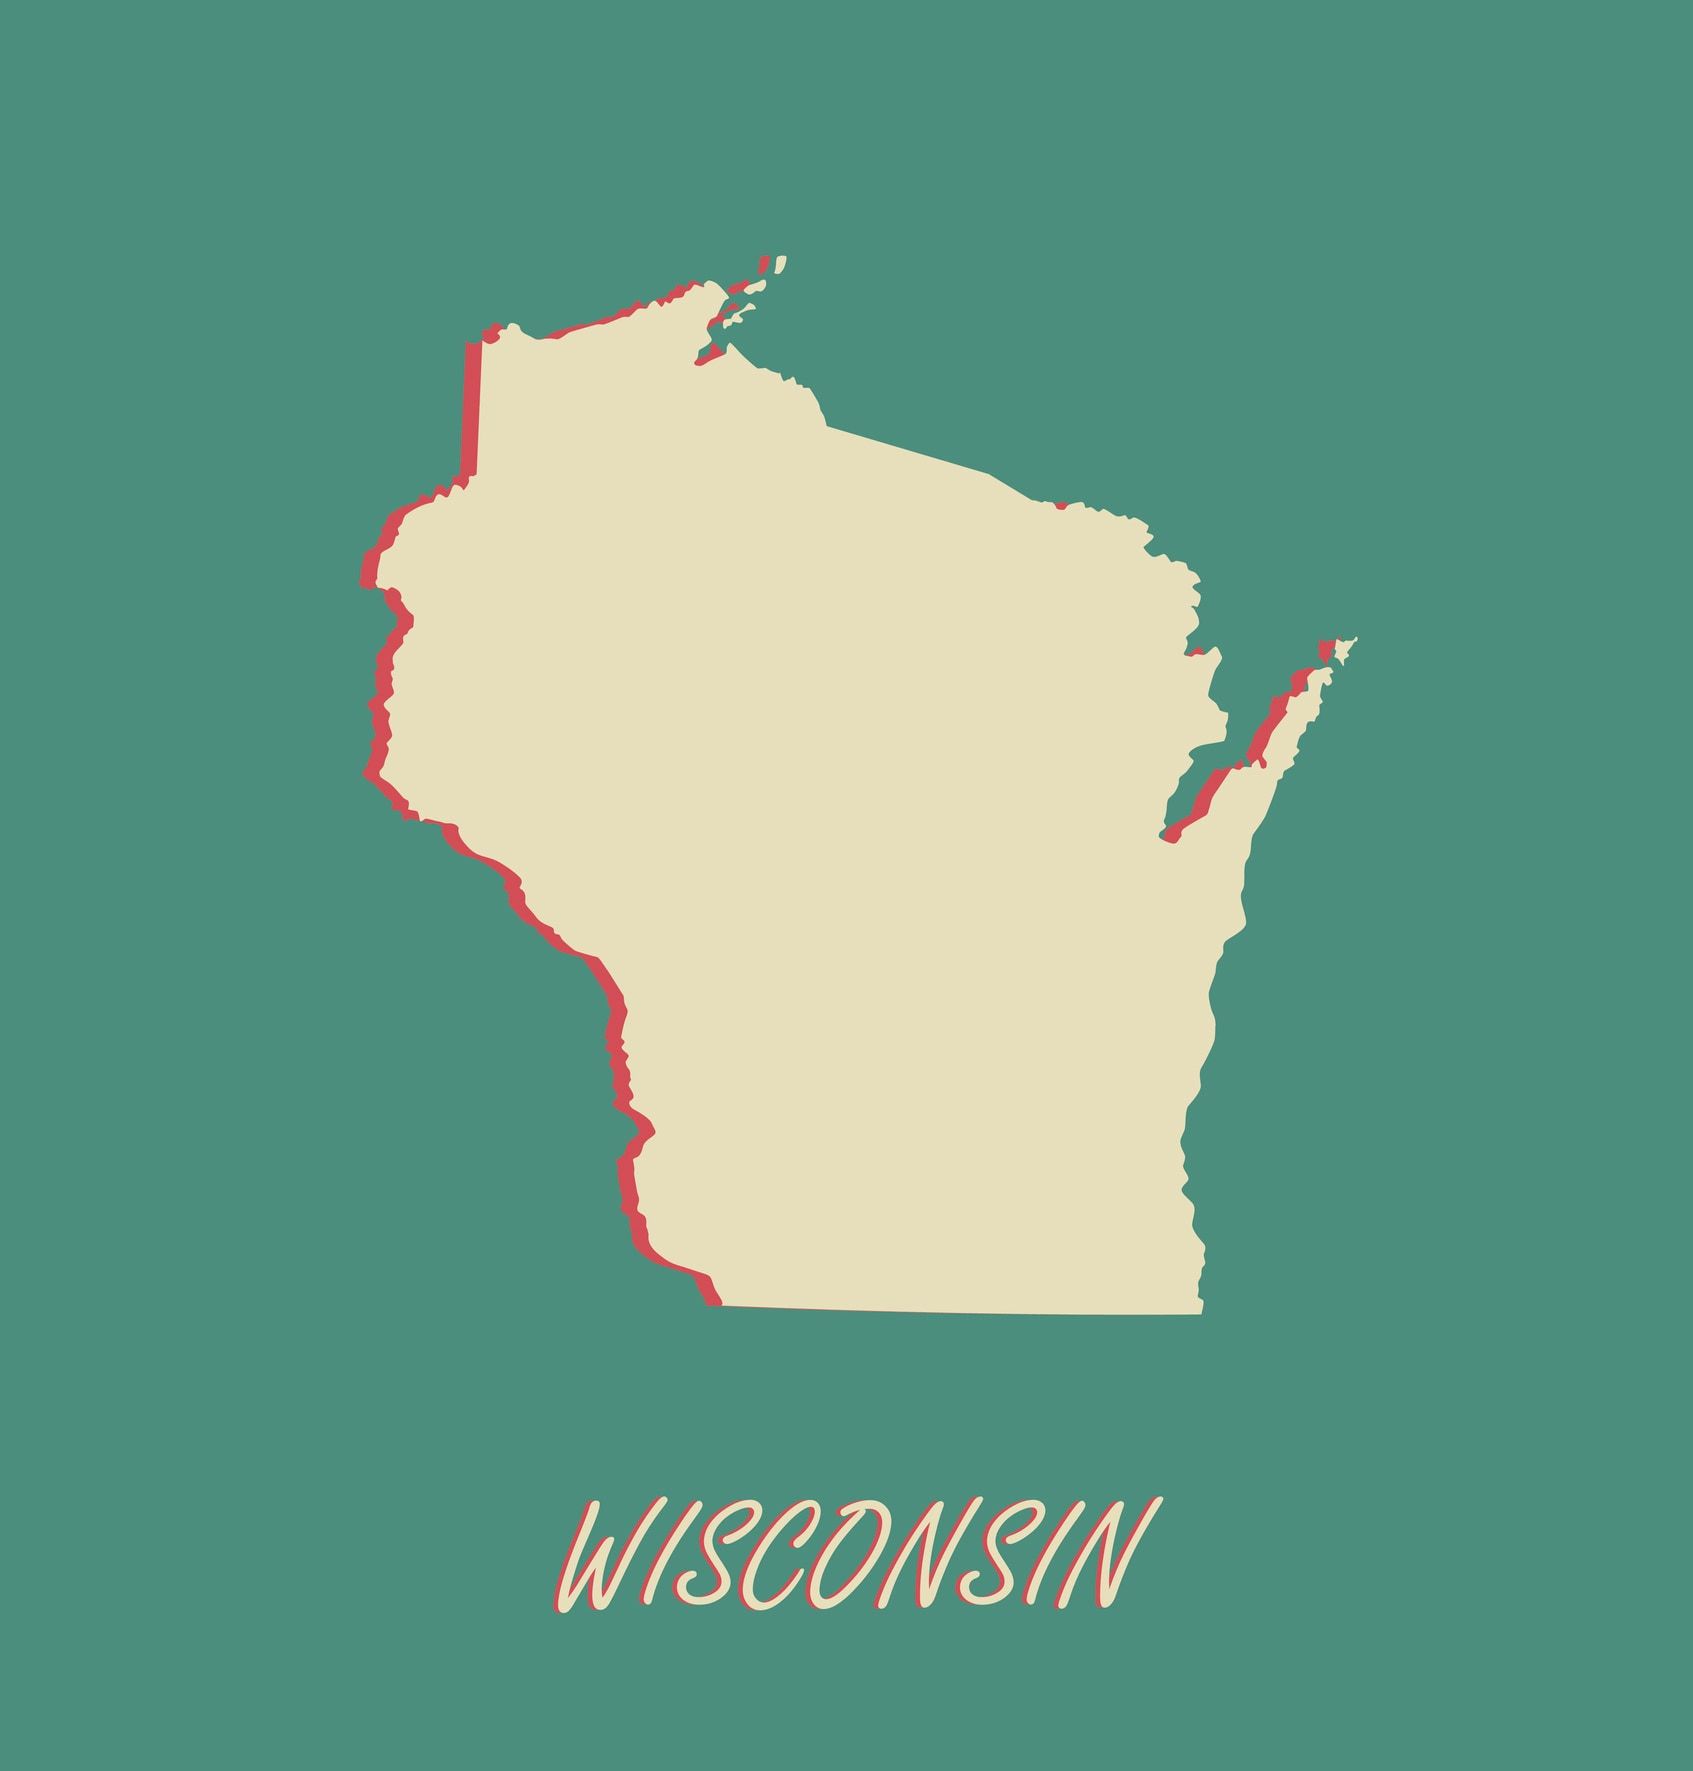 Wisconsin household employment tax and labor law guide